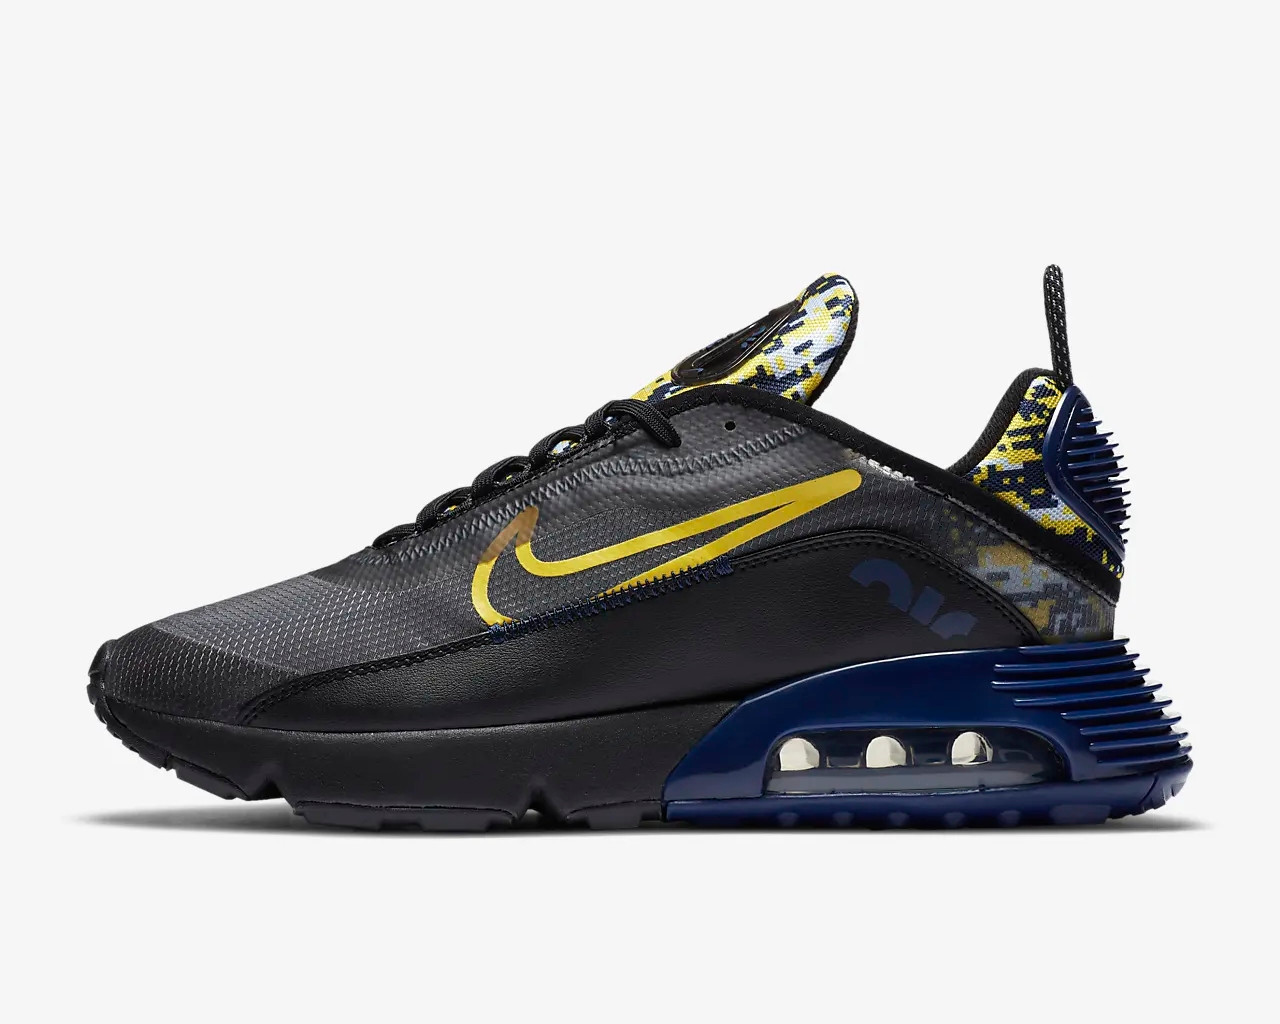 In detail stad dynastie Nike Zoom 2K White Sapphire Purple - Nike Air Max 2090 Camo Black Binary  Blue Mystic Navy Tour Yellow DB6521 - MultiscaleconsultingShops - 001